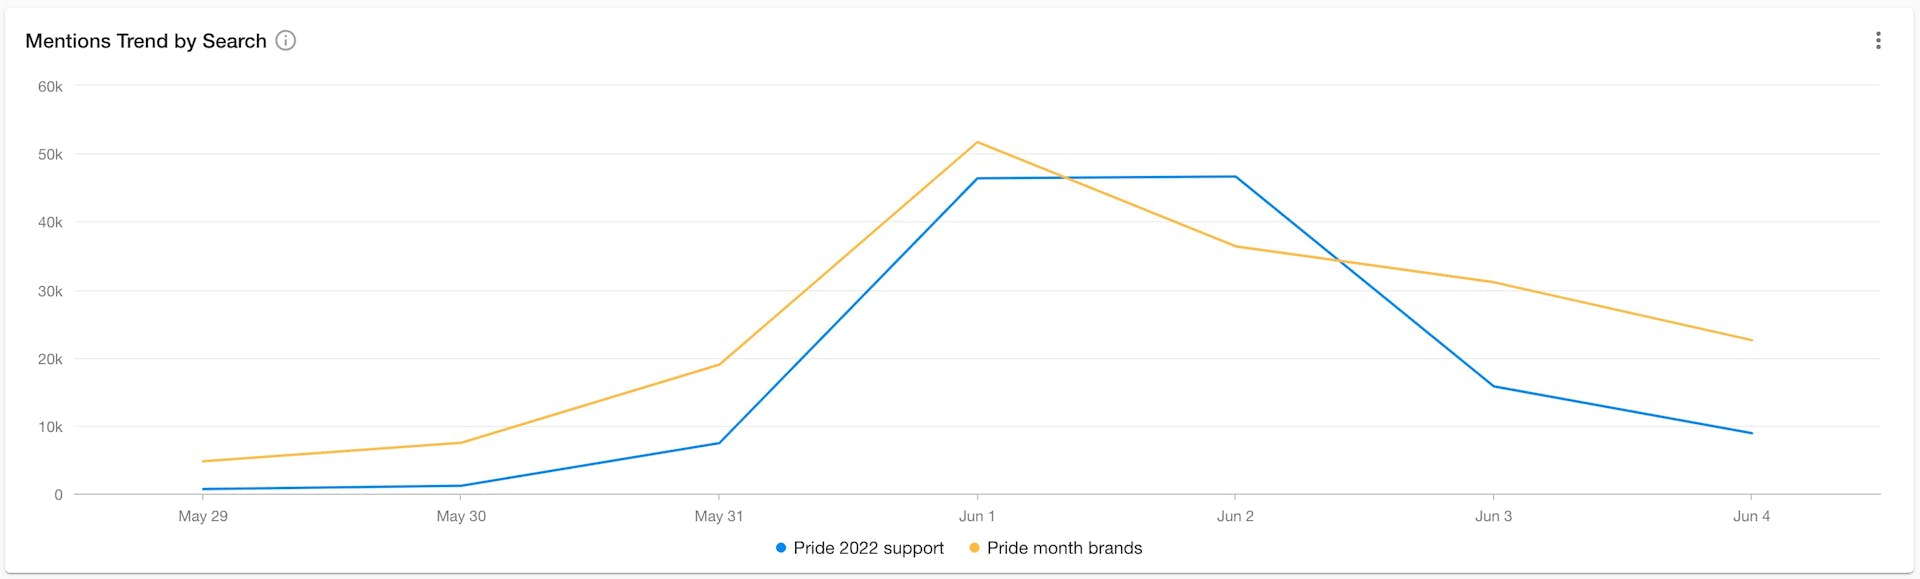 A line graph showing the similar rise and fall of conversations about brands and support around the beginning of Pride Month.